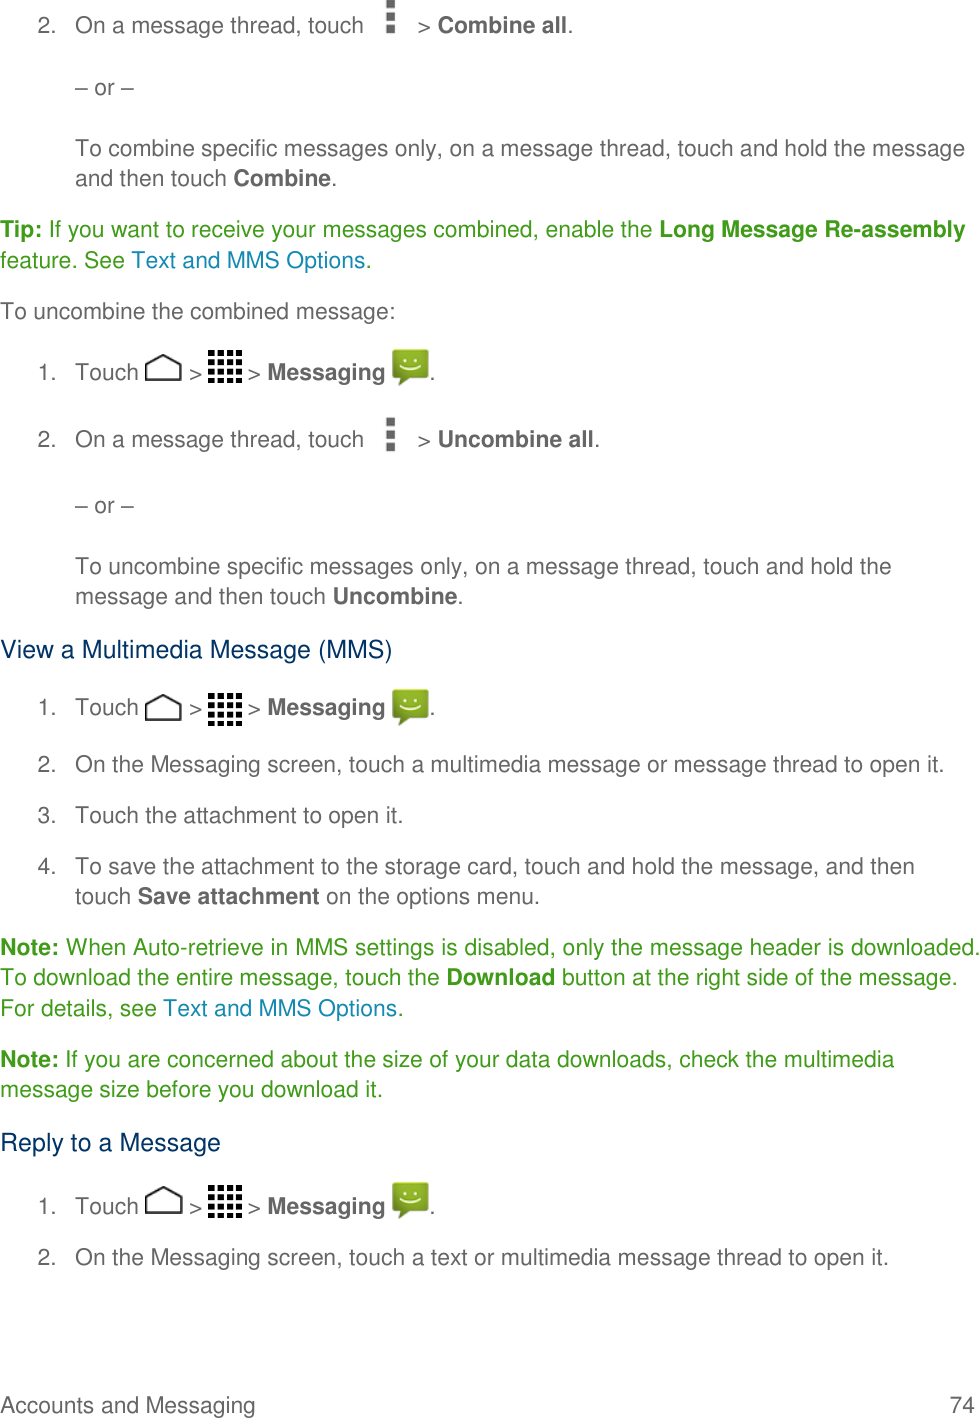 Accounts and Messaging    74 2.  On a message thread, touch   &gt; Combine all.   – or –   To combine specific messages only, on a message thread, touch and hold the message and then touch Combine. Tip: If you want to receive your messages combined, enable the Long Message Re-assembly feature. See Text and MMS Options. To uncombine the combined message: 1.  Touch   &gt;   &gt; Messaging  . 2.  On a message thread, touch   &gt; Uncombine all.   – or –   To uncombine specific messages only, on a message thread, touch and hold the message and then touch Uncombine.  View a Multimedia Message (MMS) 1.  Touch   &gt;   &gt; Messaging  . 2.  On the Messaging screen, touch a multimedia message or message thread to open it. 3.  Touch the attachment to open it. 4.  To save the attachment to the storage card, touch and hold the message, and then touch Save attachment on the options menu. Note: When Auto-retrieve in MMS settings is disabled, only the message header is downloaded. To download the entire message, touch the Download button at the right side of the message. For details, see Text and MMS Options. Note: If you are concerned about the size of your data downloads, check the multimedia message size before you download it. Reply to a Message 1.  Touch   &gt;   &gt; Messaging  . 2.  On the Messaging screen, touch a text or multimedia message thread to open it. 